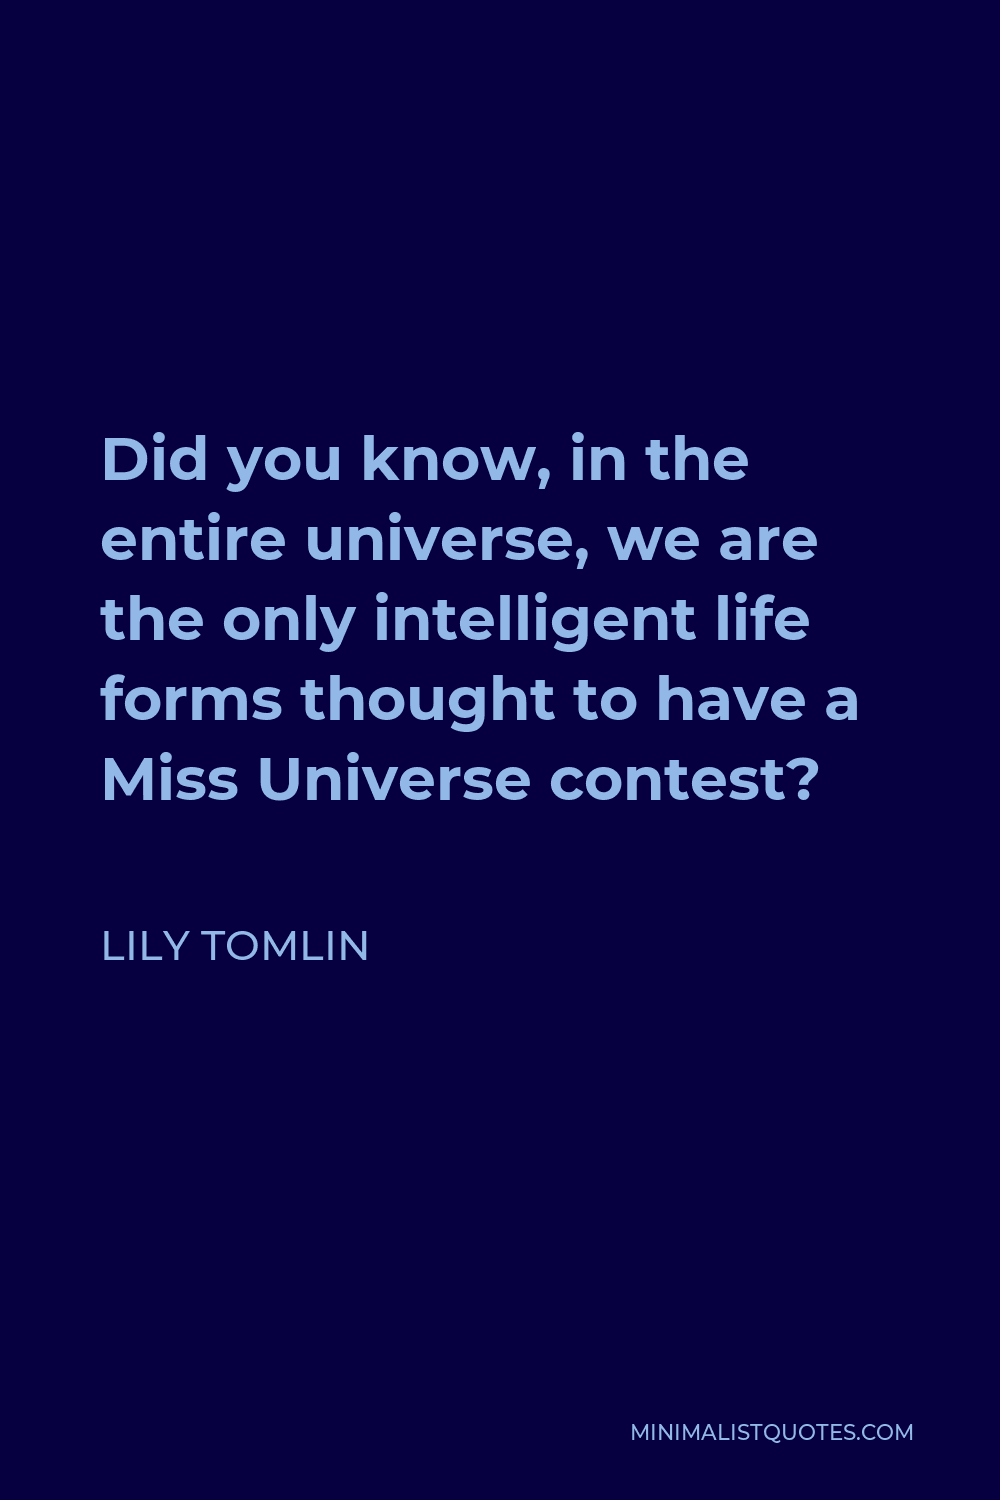 Lily Tomlin Quote - Did you know, in the entire universe, we are the only intelligent life forms thought to have a Miss Universe contest?